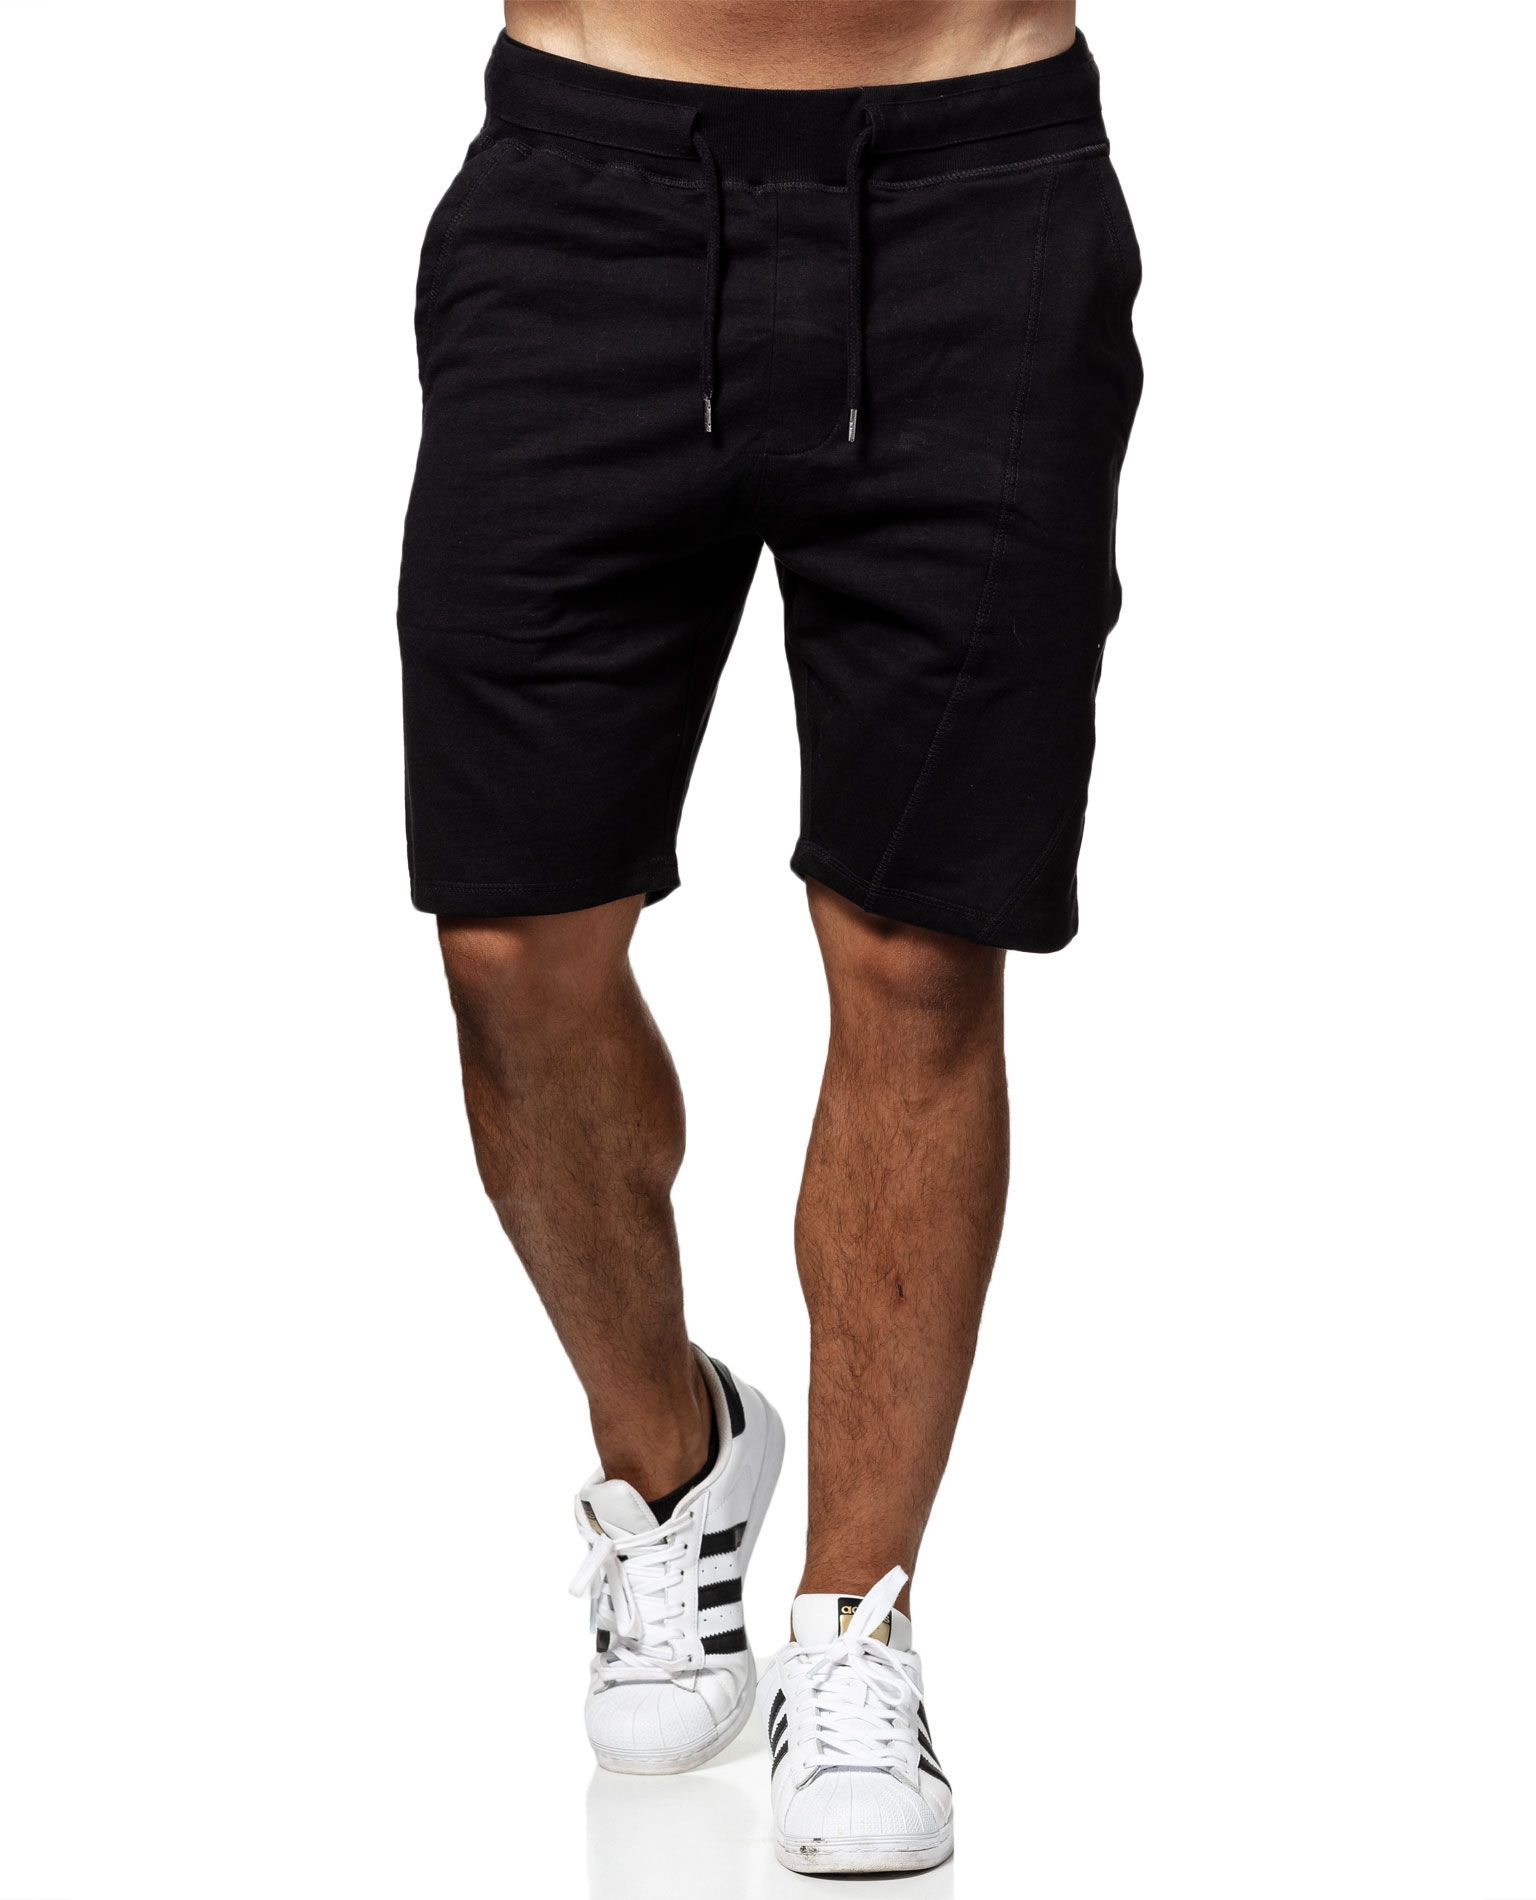 Knox Sweat Shorts Black Only & Sons - 0231 - Shorts - Jerone.com